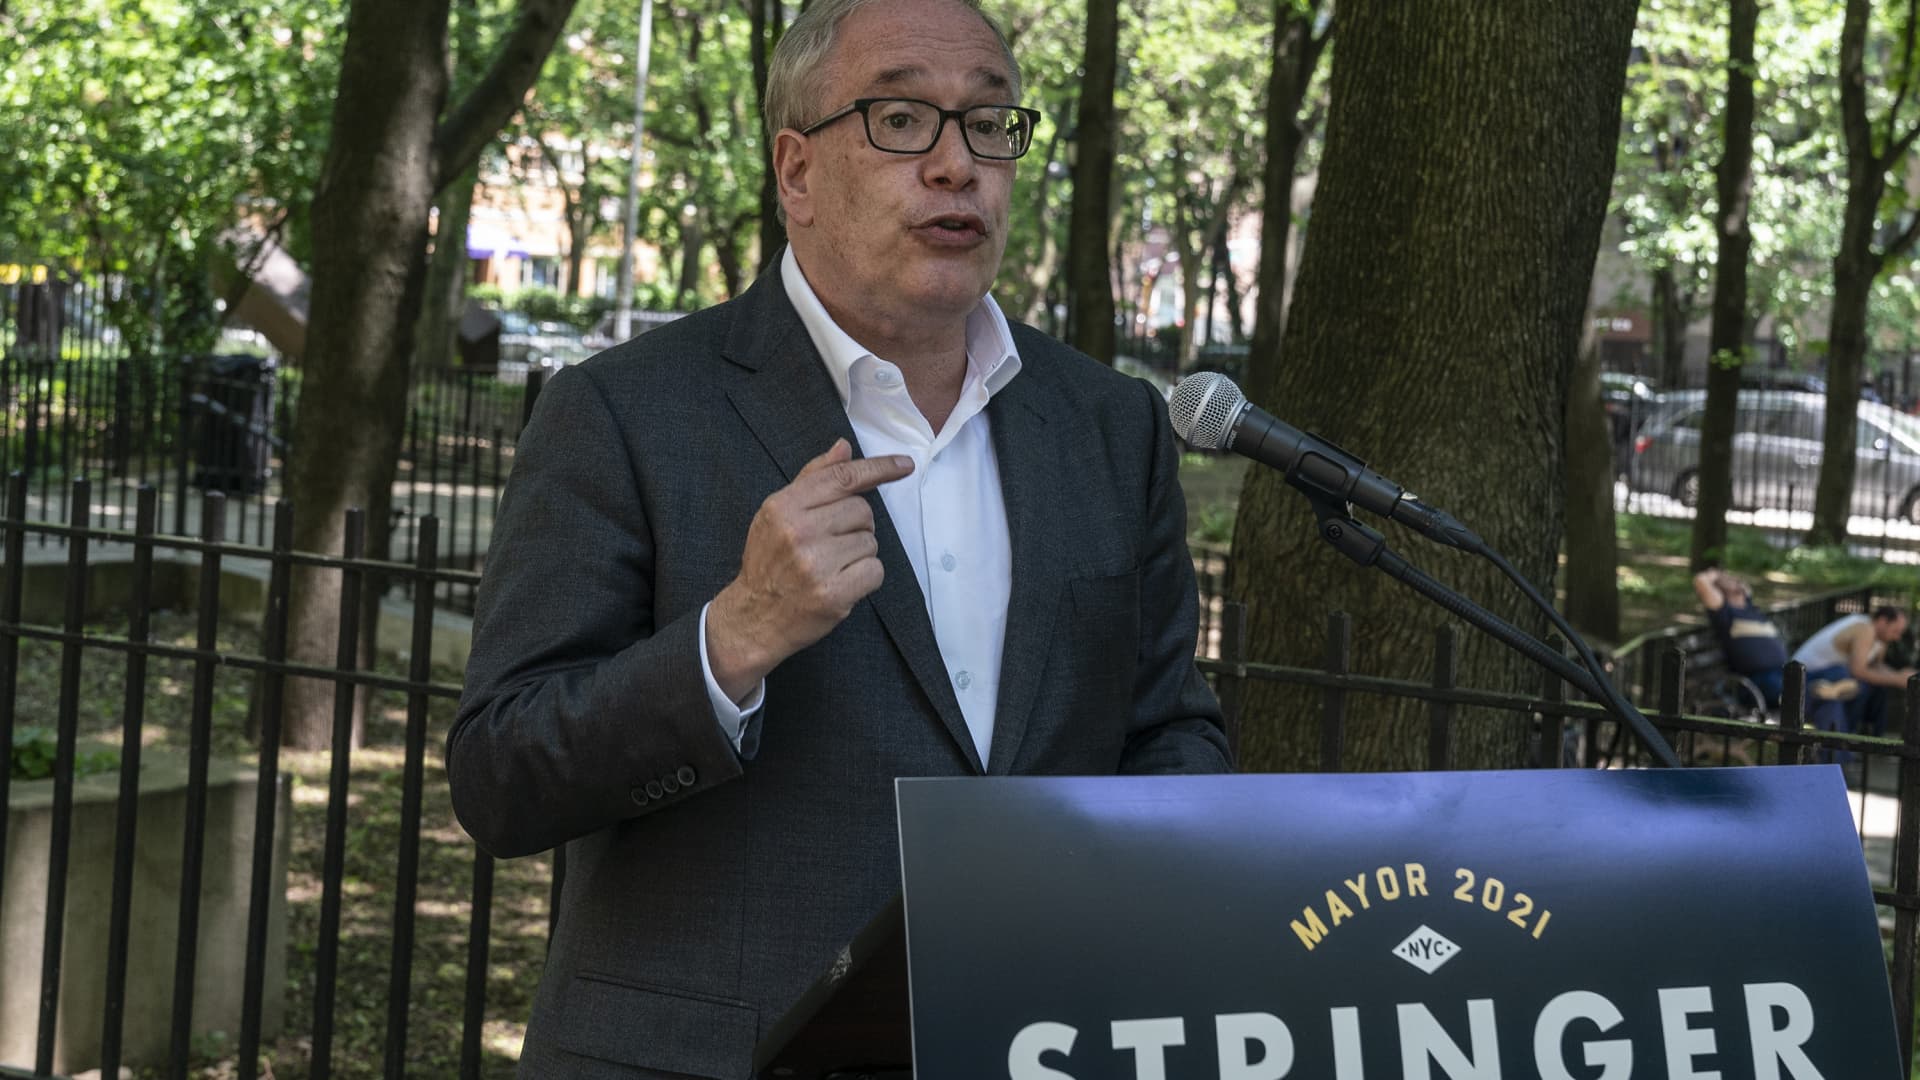 City Comptroller and Mayoral candidate Scott Stringer made a proposal to install portable public restrooms in all parks and playgrounds at Bellevue South Park.